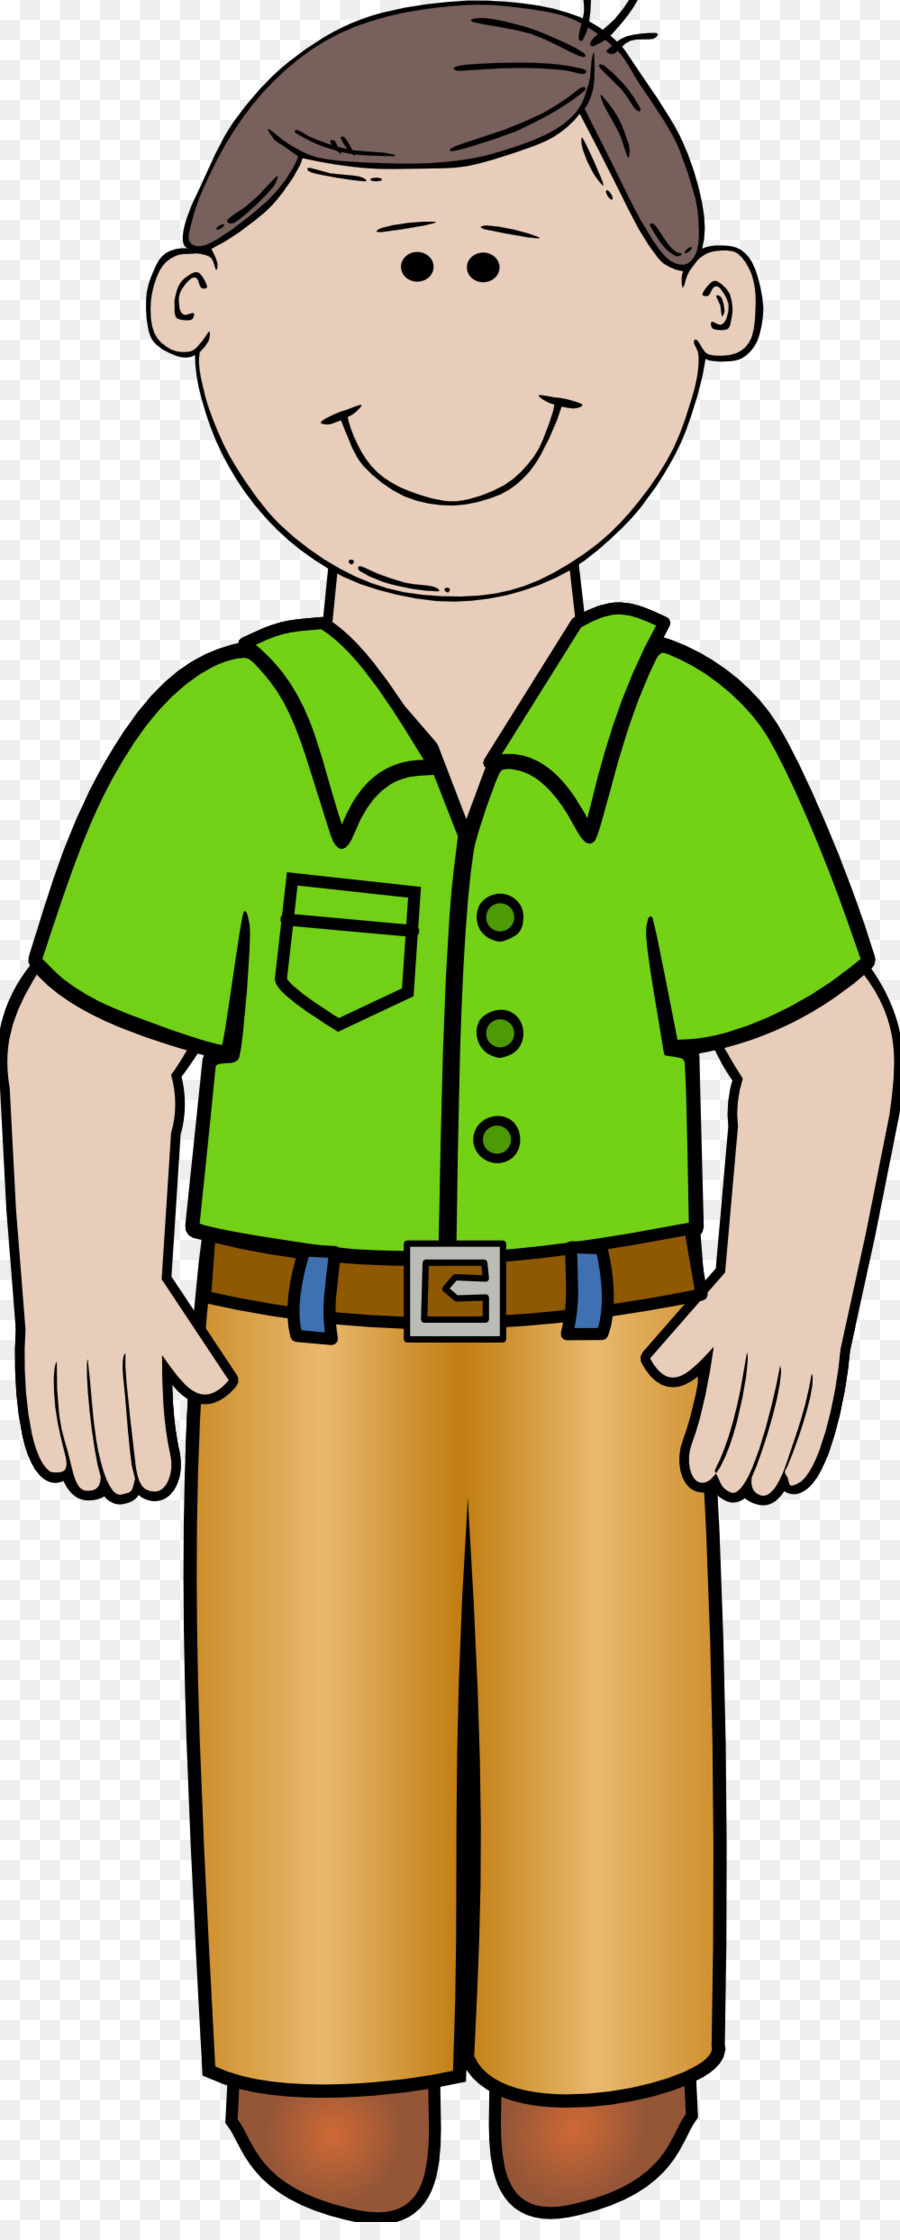 Dad clipart. Father mother cartoon clip